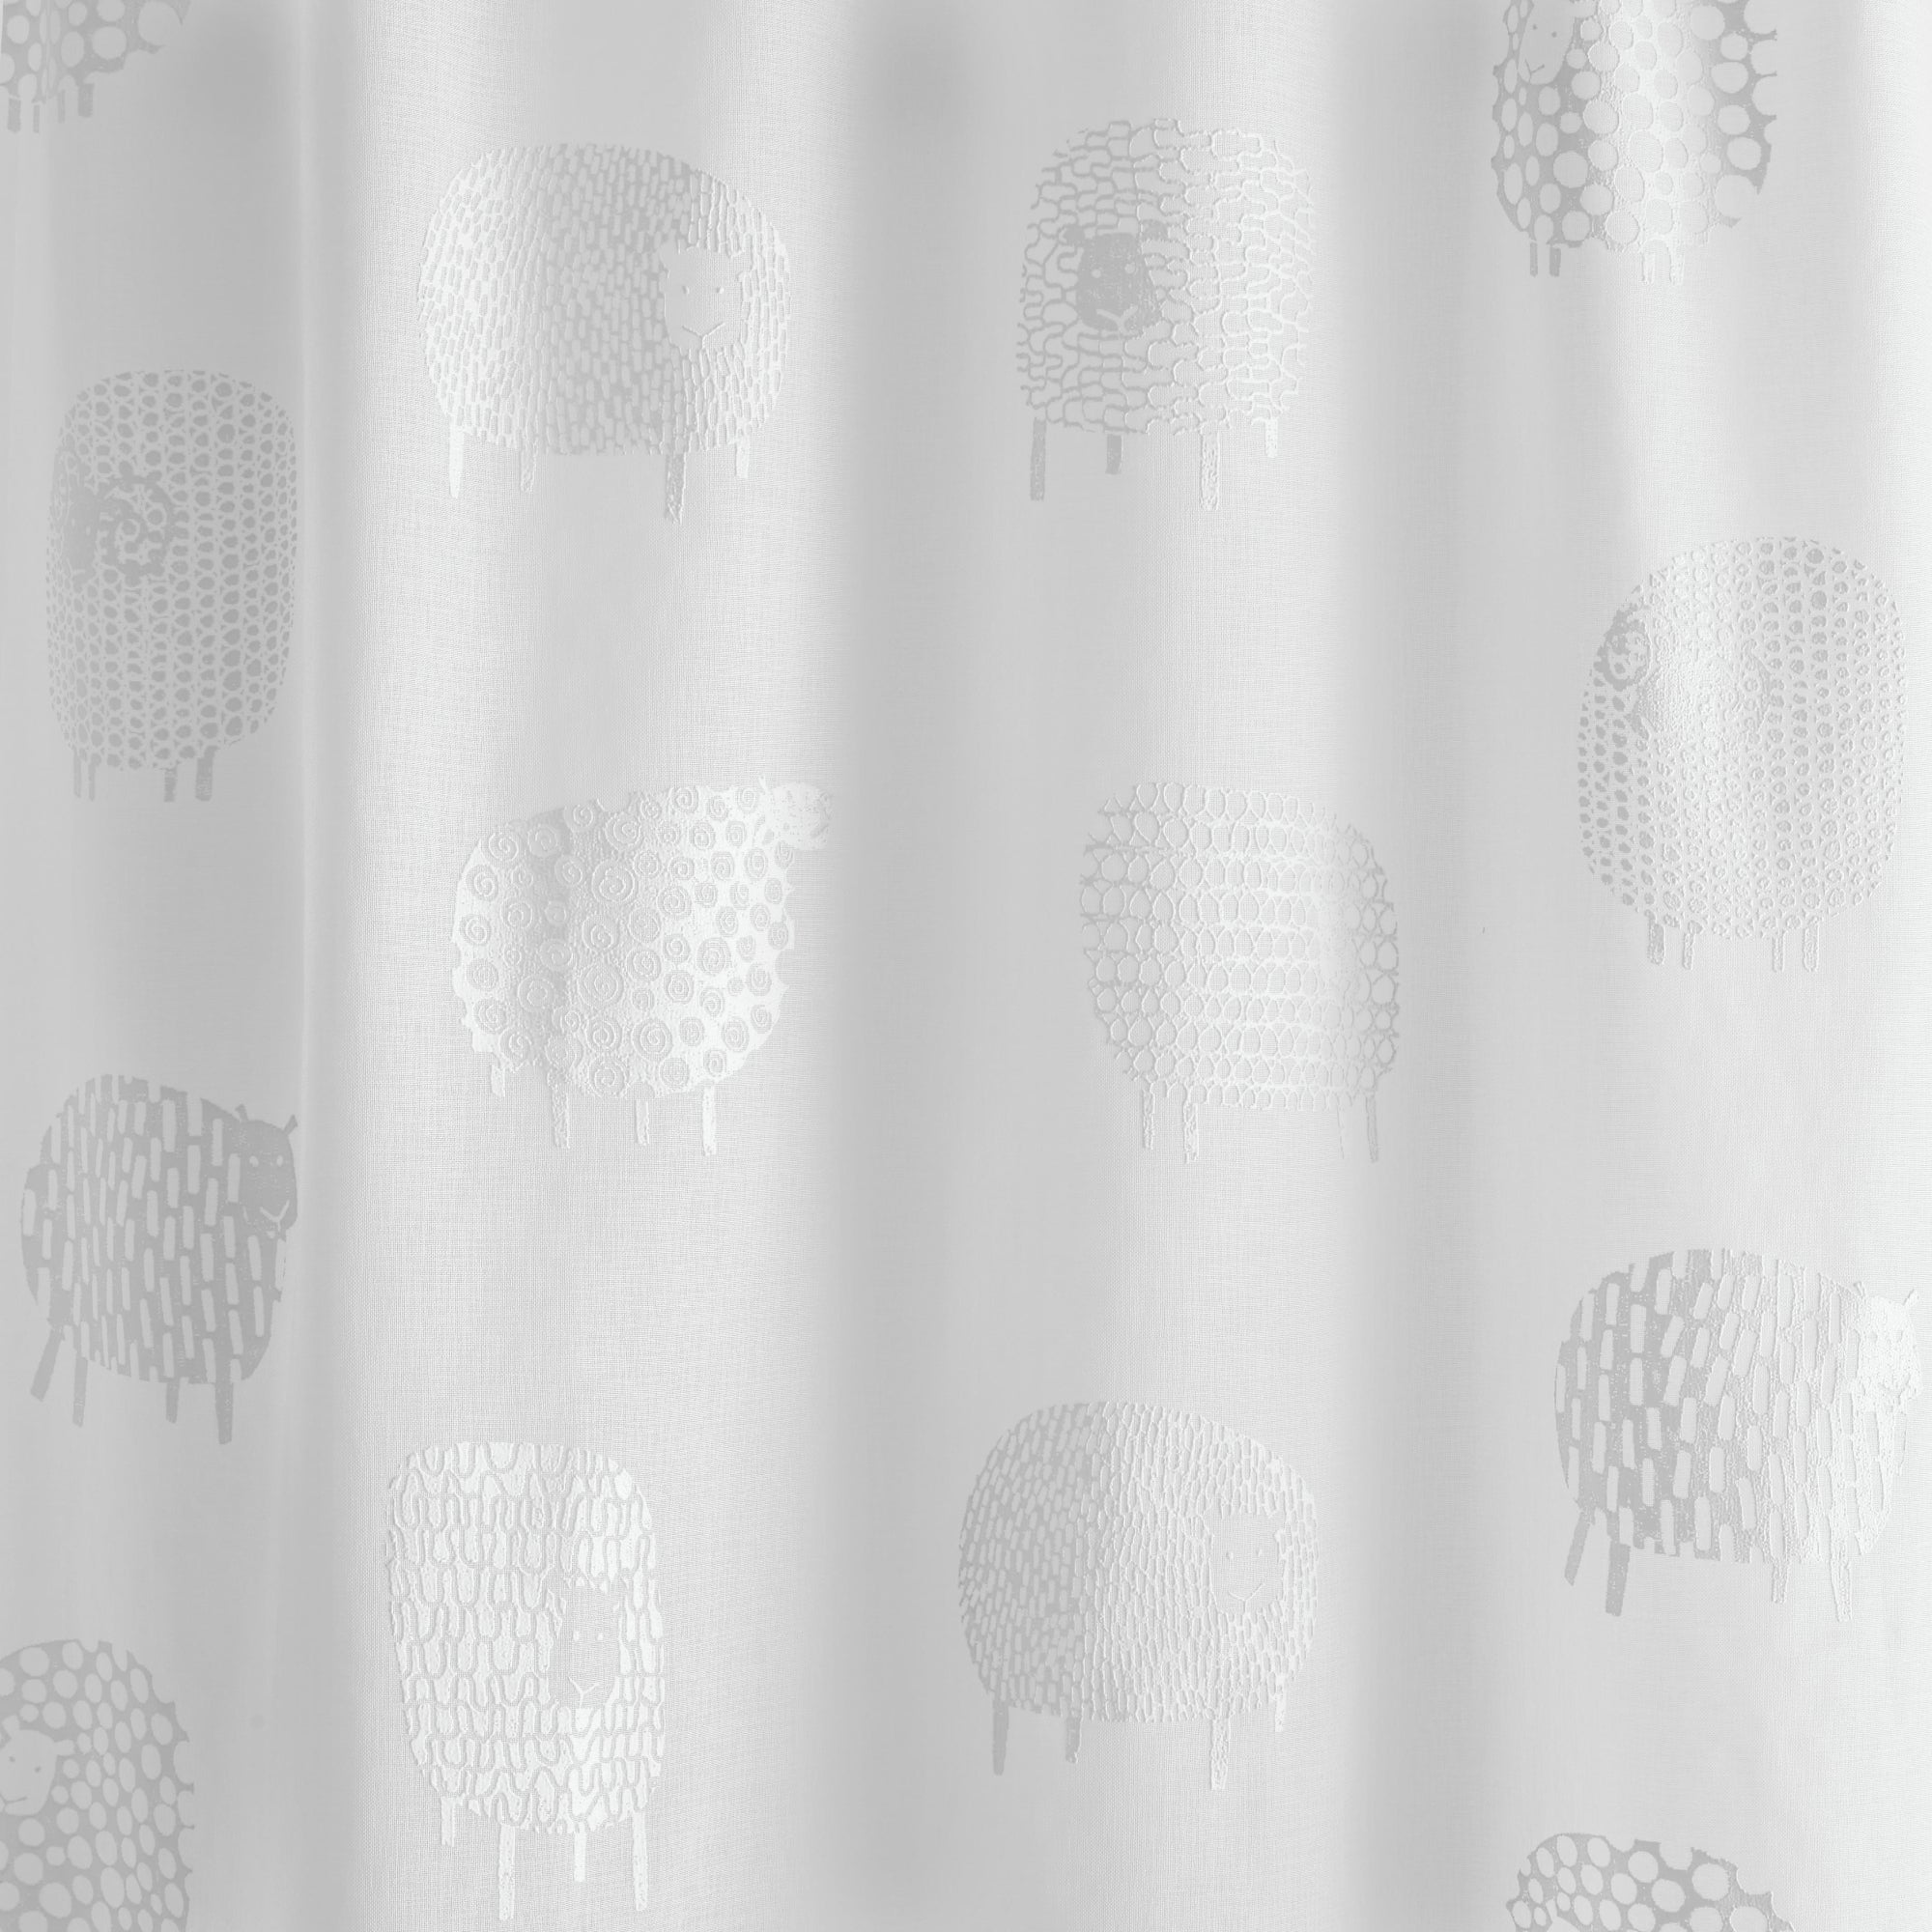 Voile Panel Dotty Sheep by Fusion in White